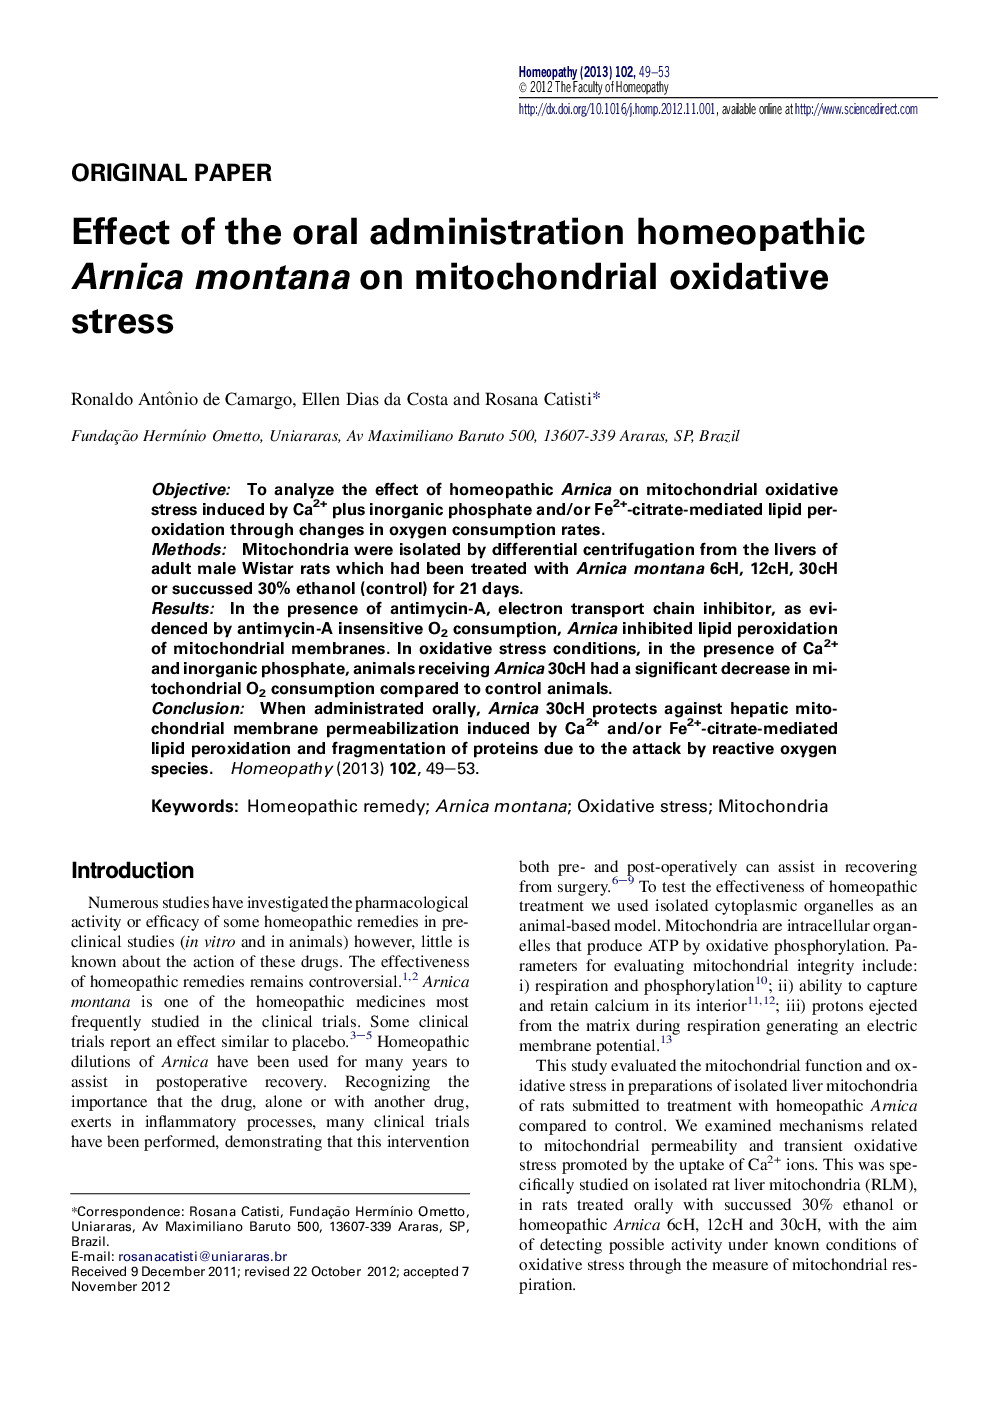 Effect of the oral administration homeopathic Arnica montana on mitochondrial oxidative stress